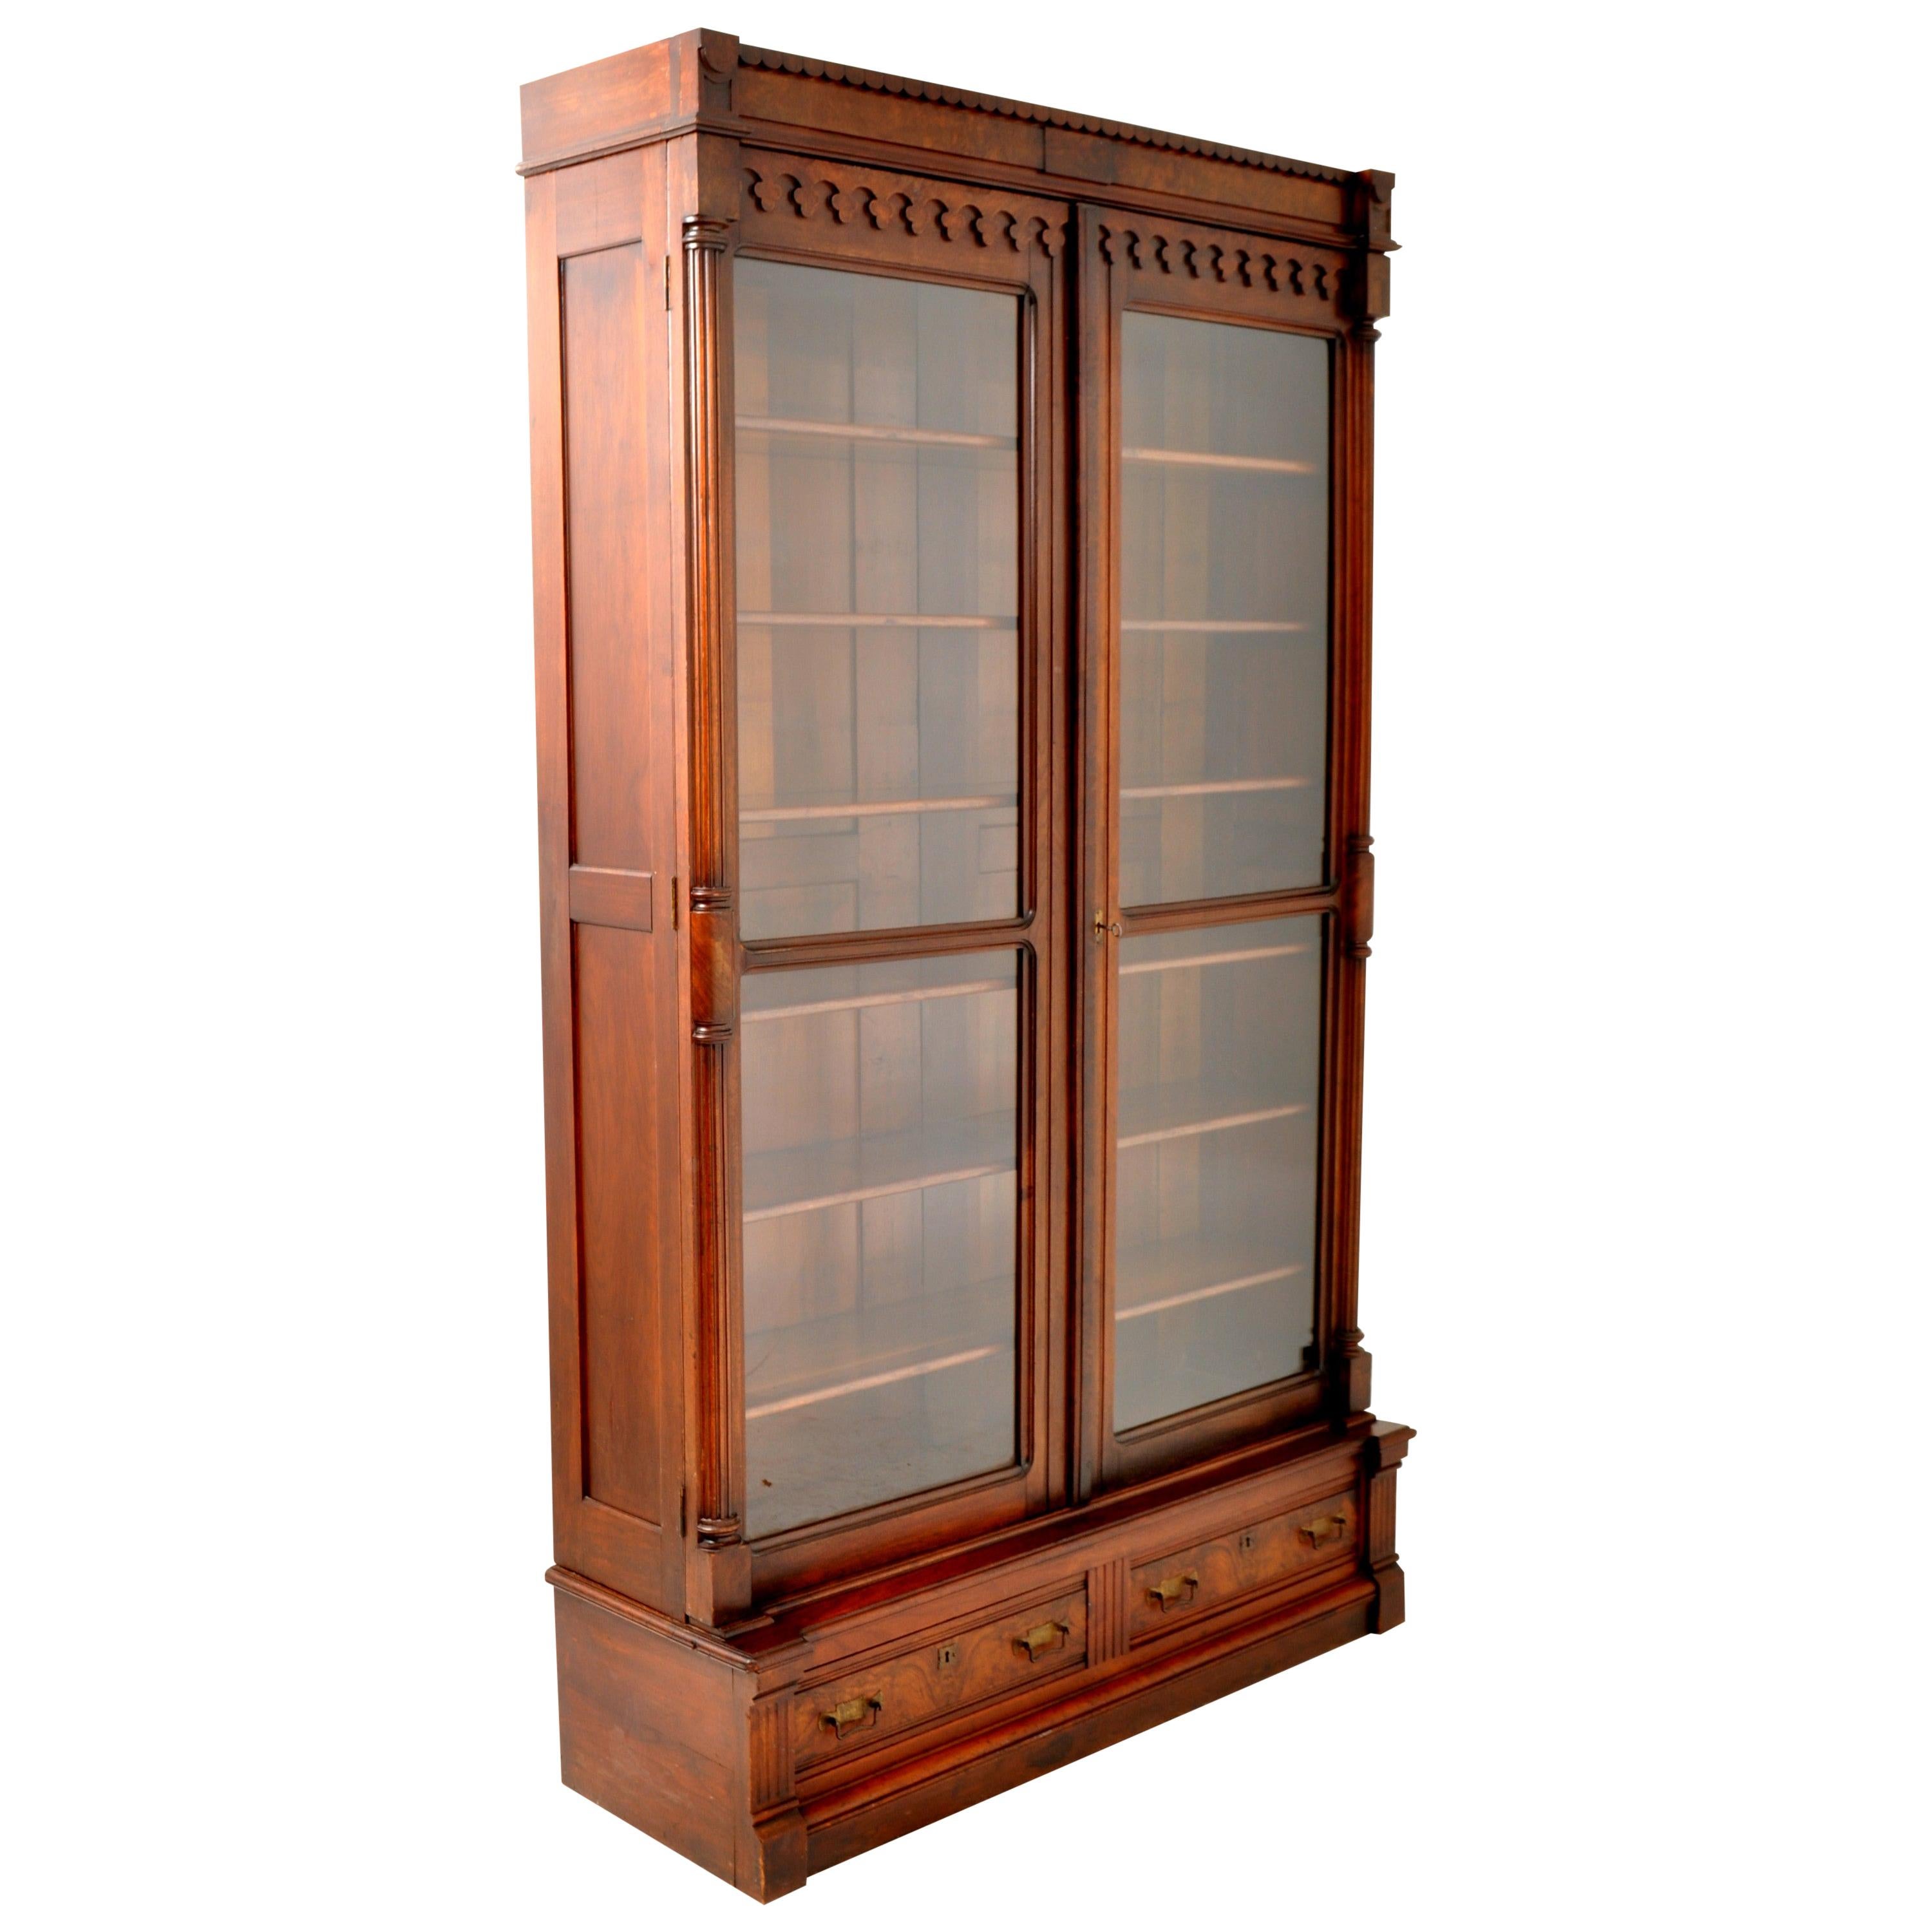 Antique American Renaissance Revival Eastlake Carved Walnut Tall Bookcase, 1875